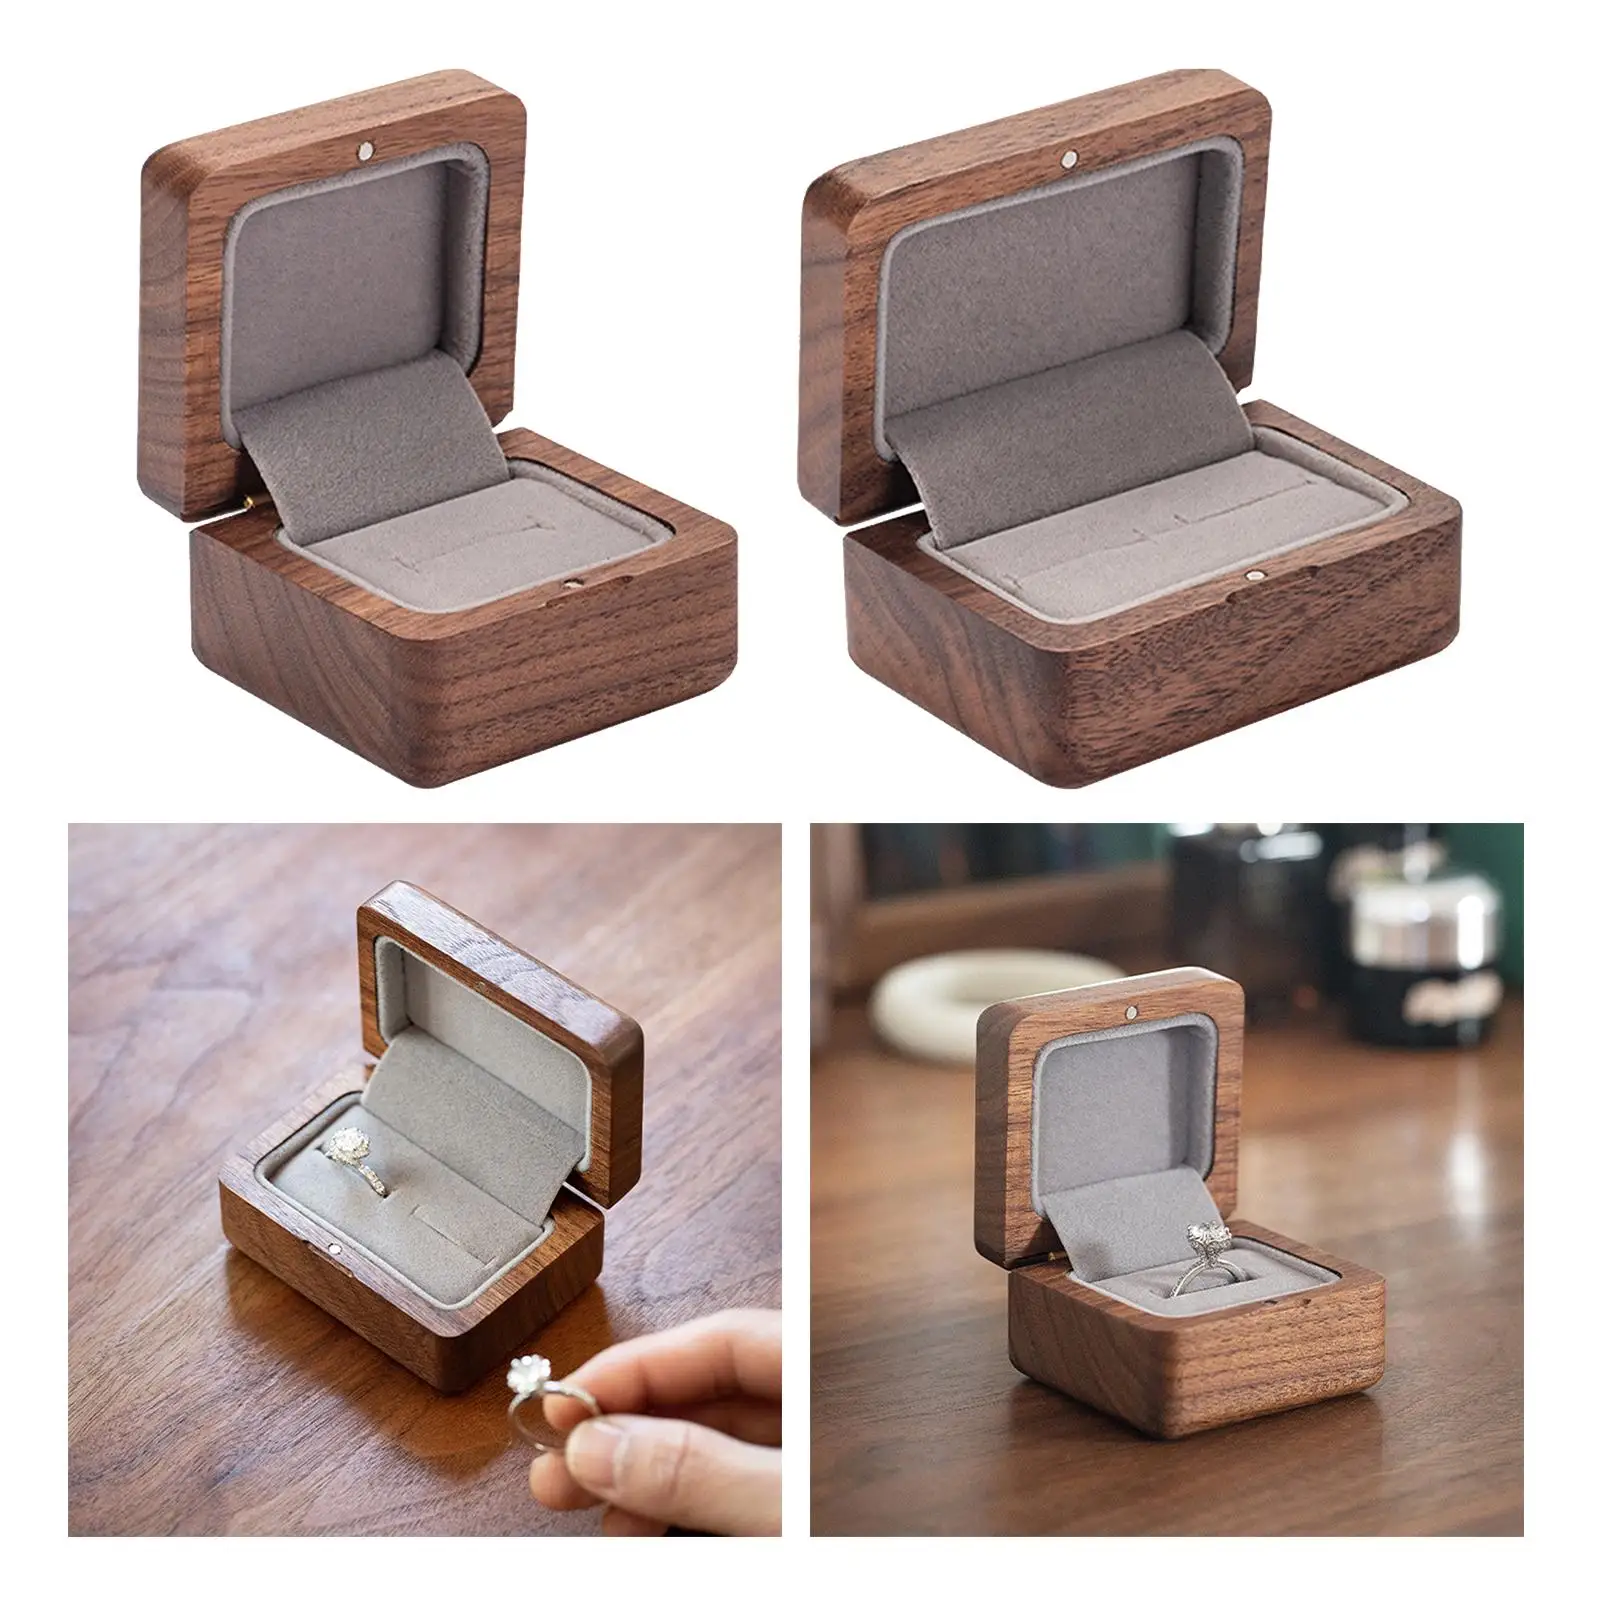 Wooden Ring Box Handmade Ring Holder Box for Ceremony Anniversary Proposal